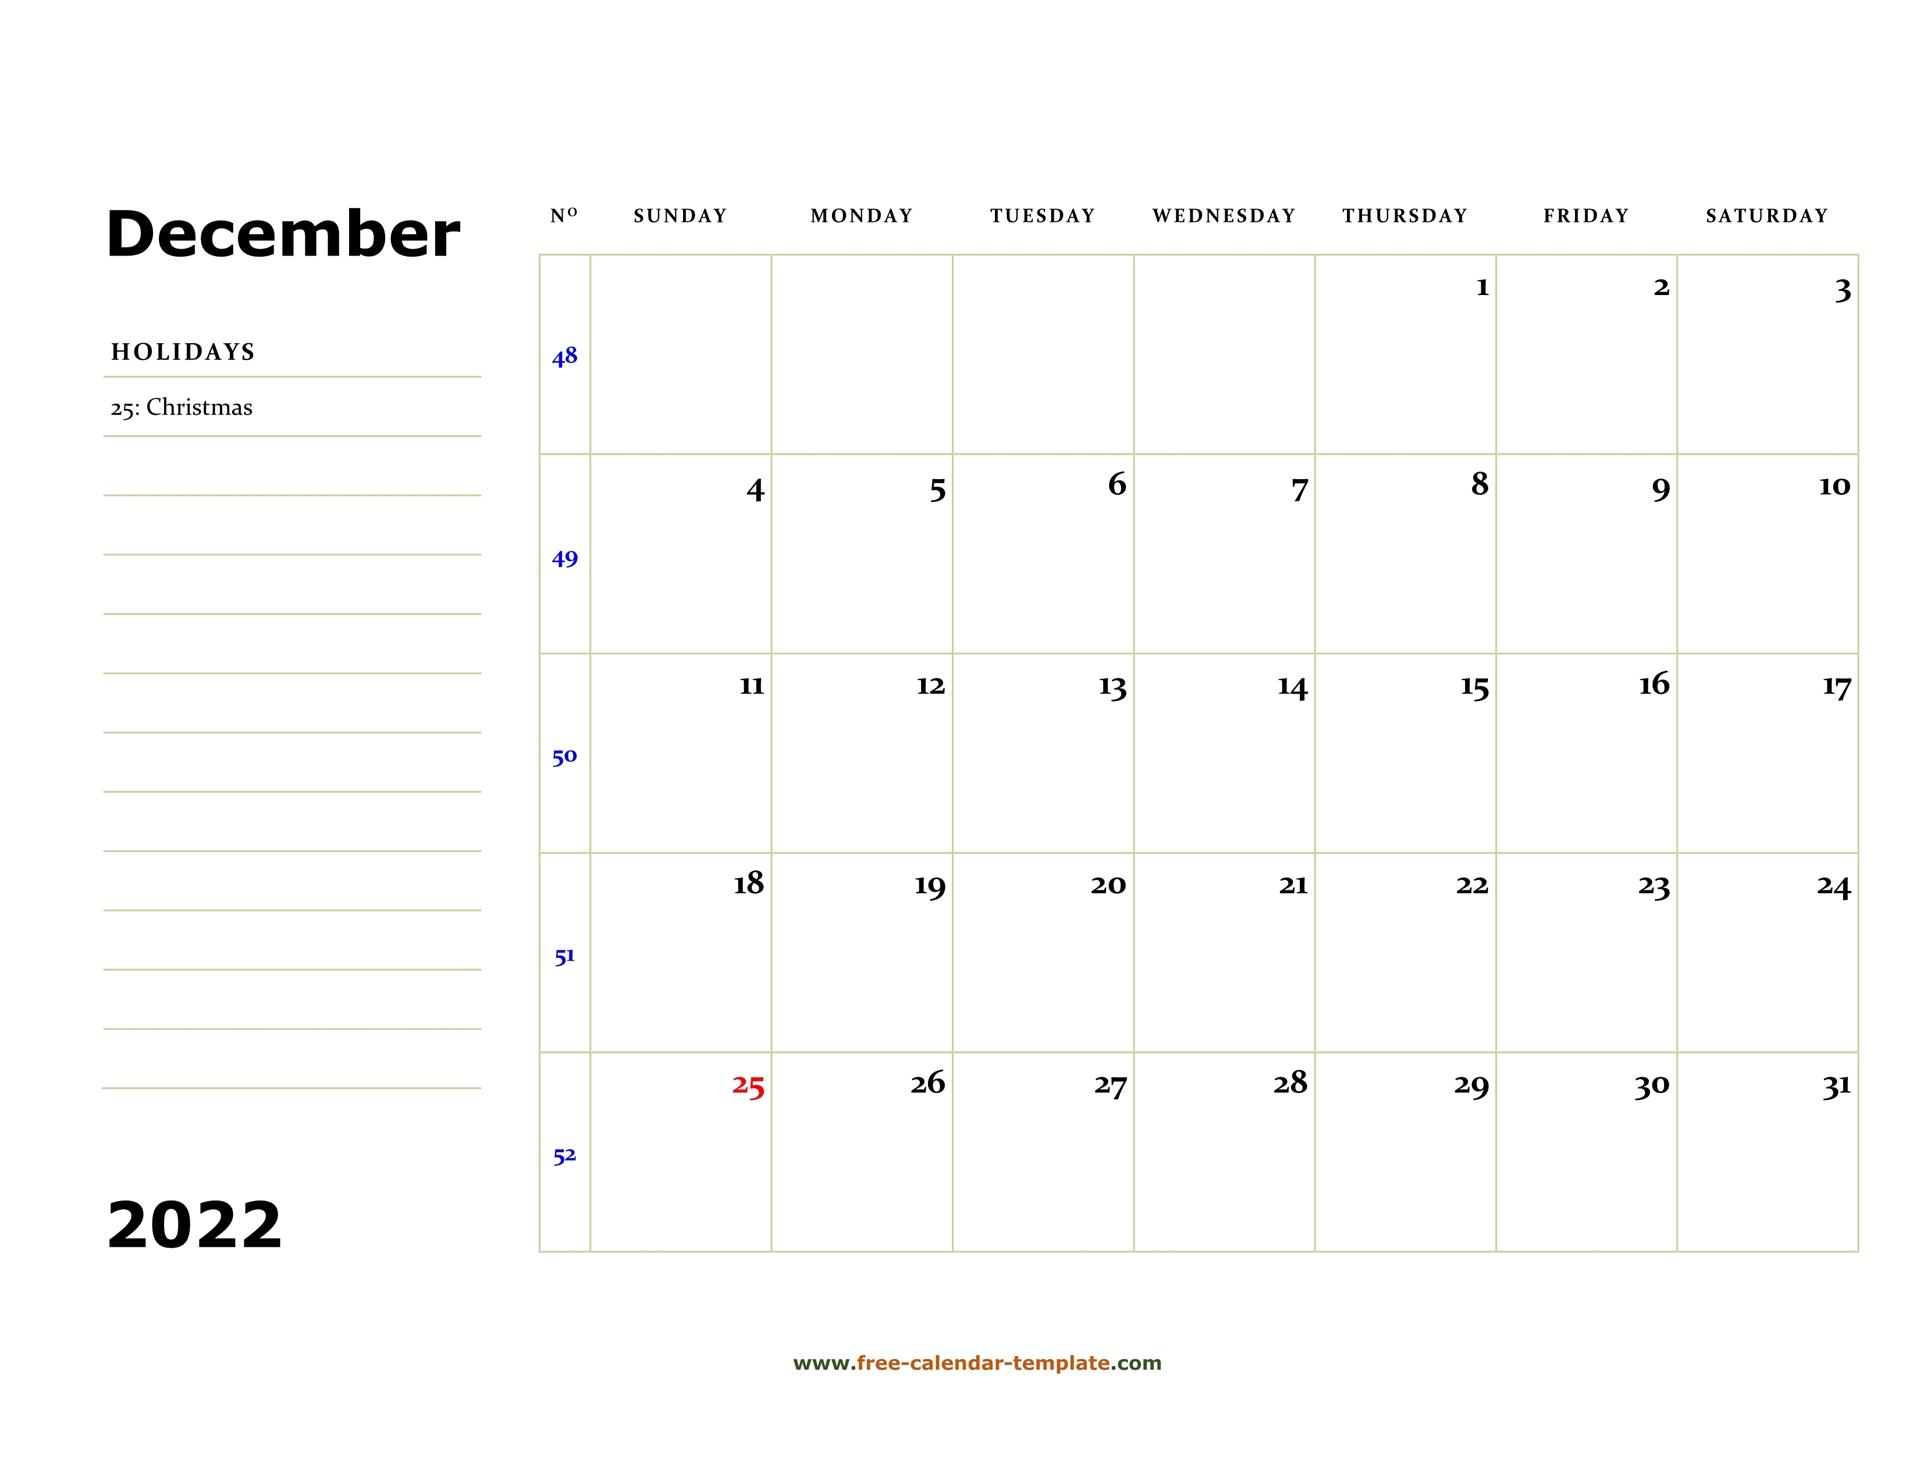 Pick Calendar For The Month Of December 2022